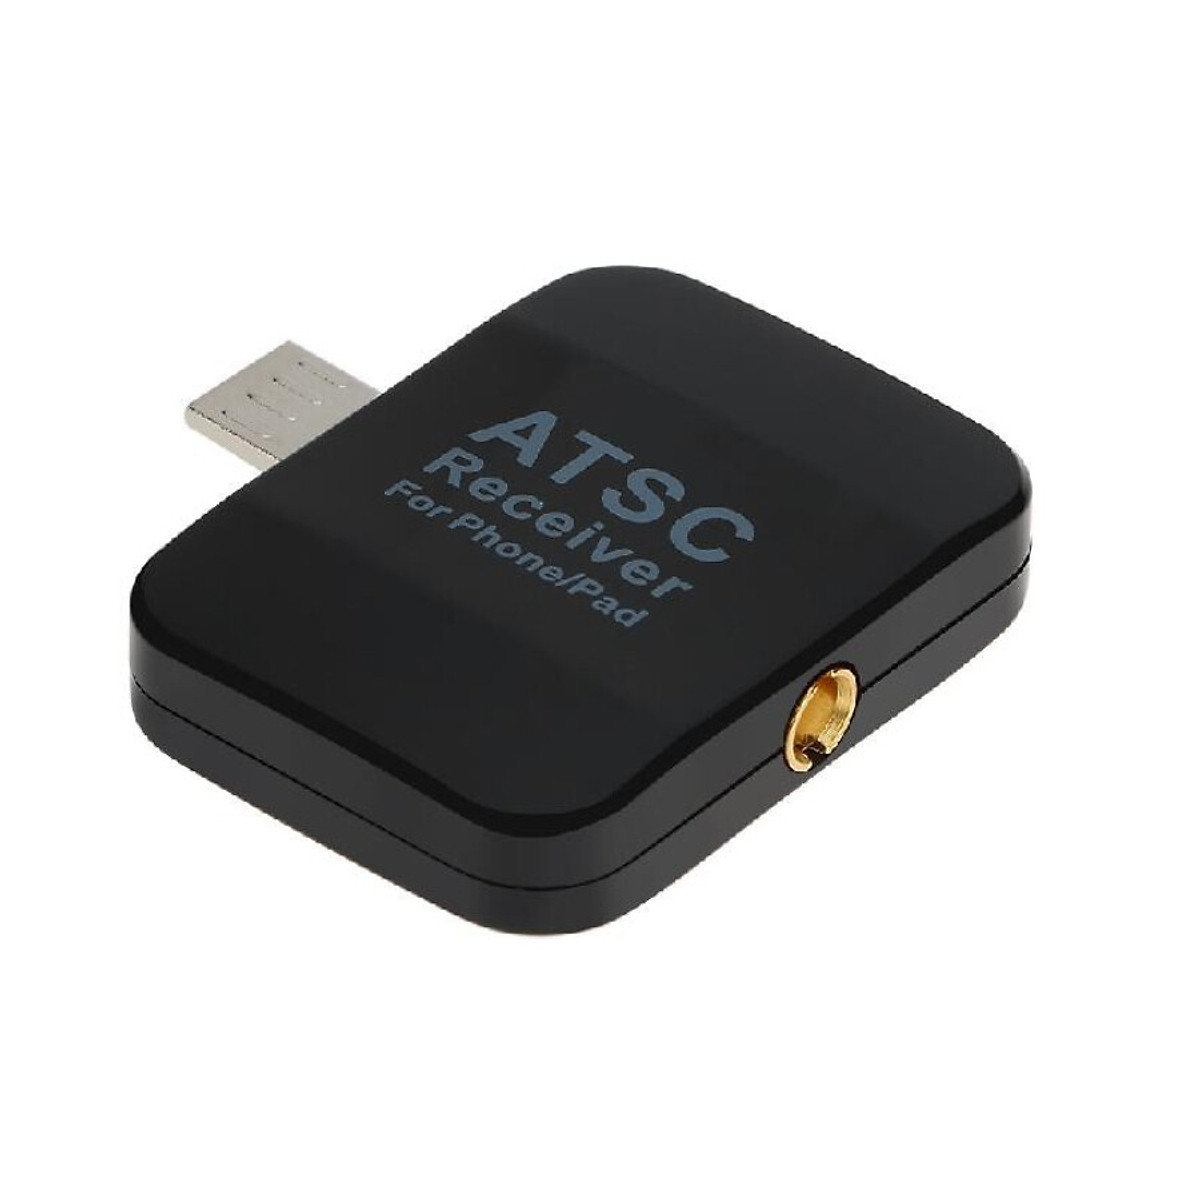 atsc android tv tuner digital receiver usb tv stick for android pad & phone j7o4